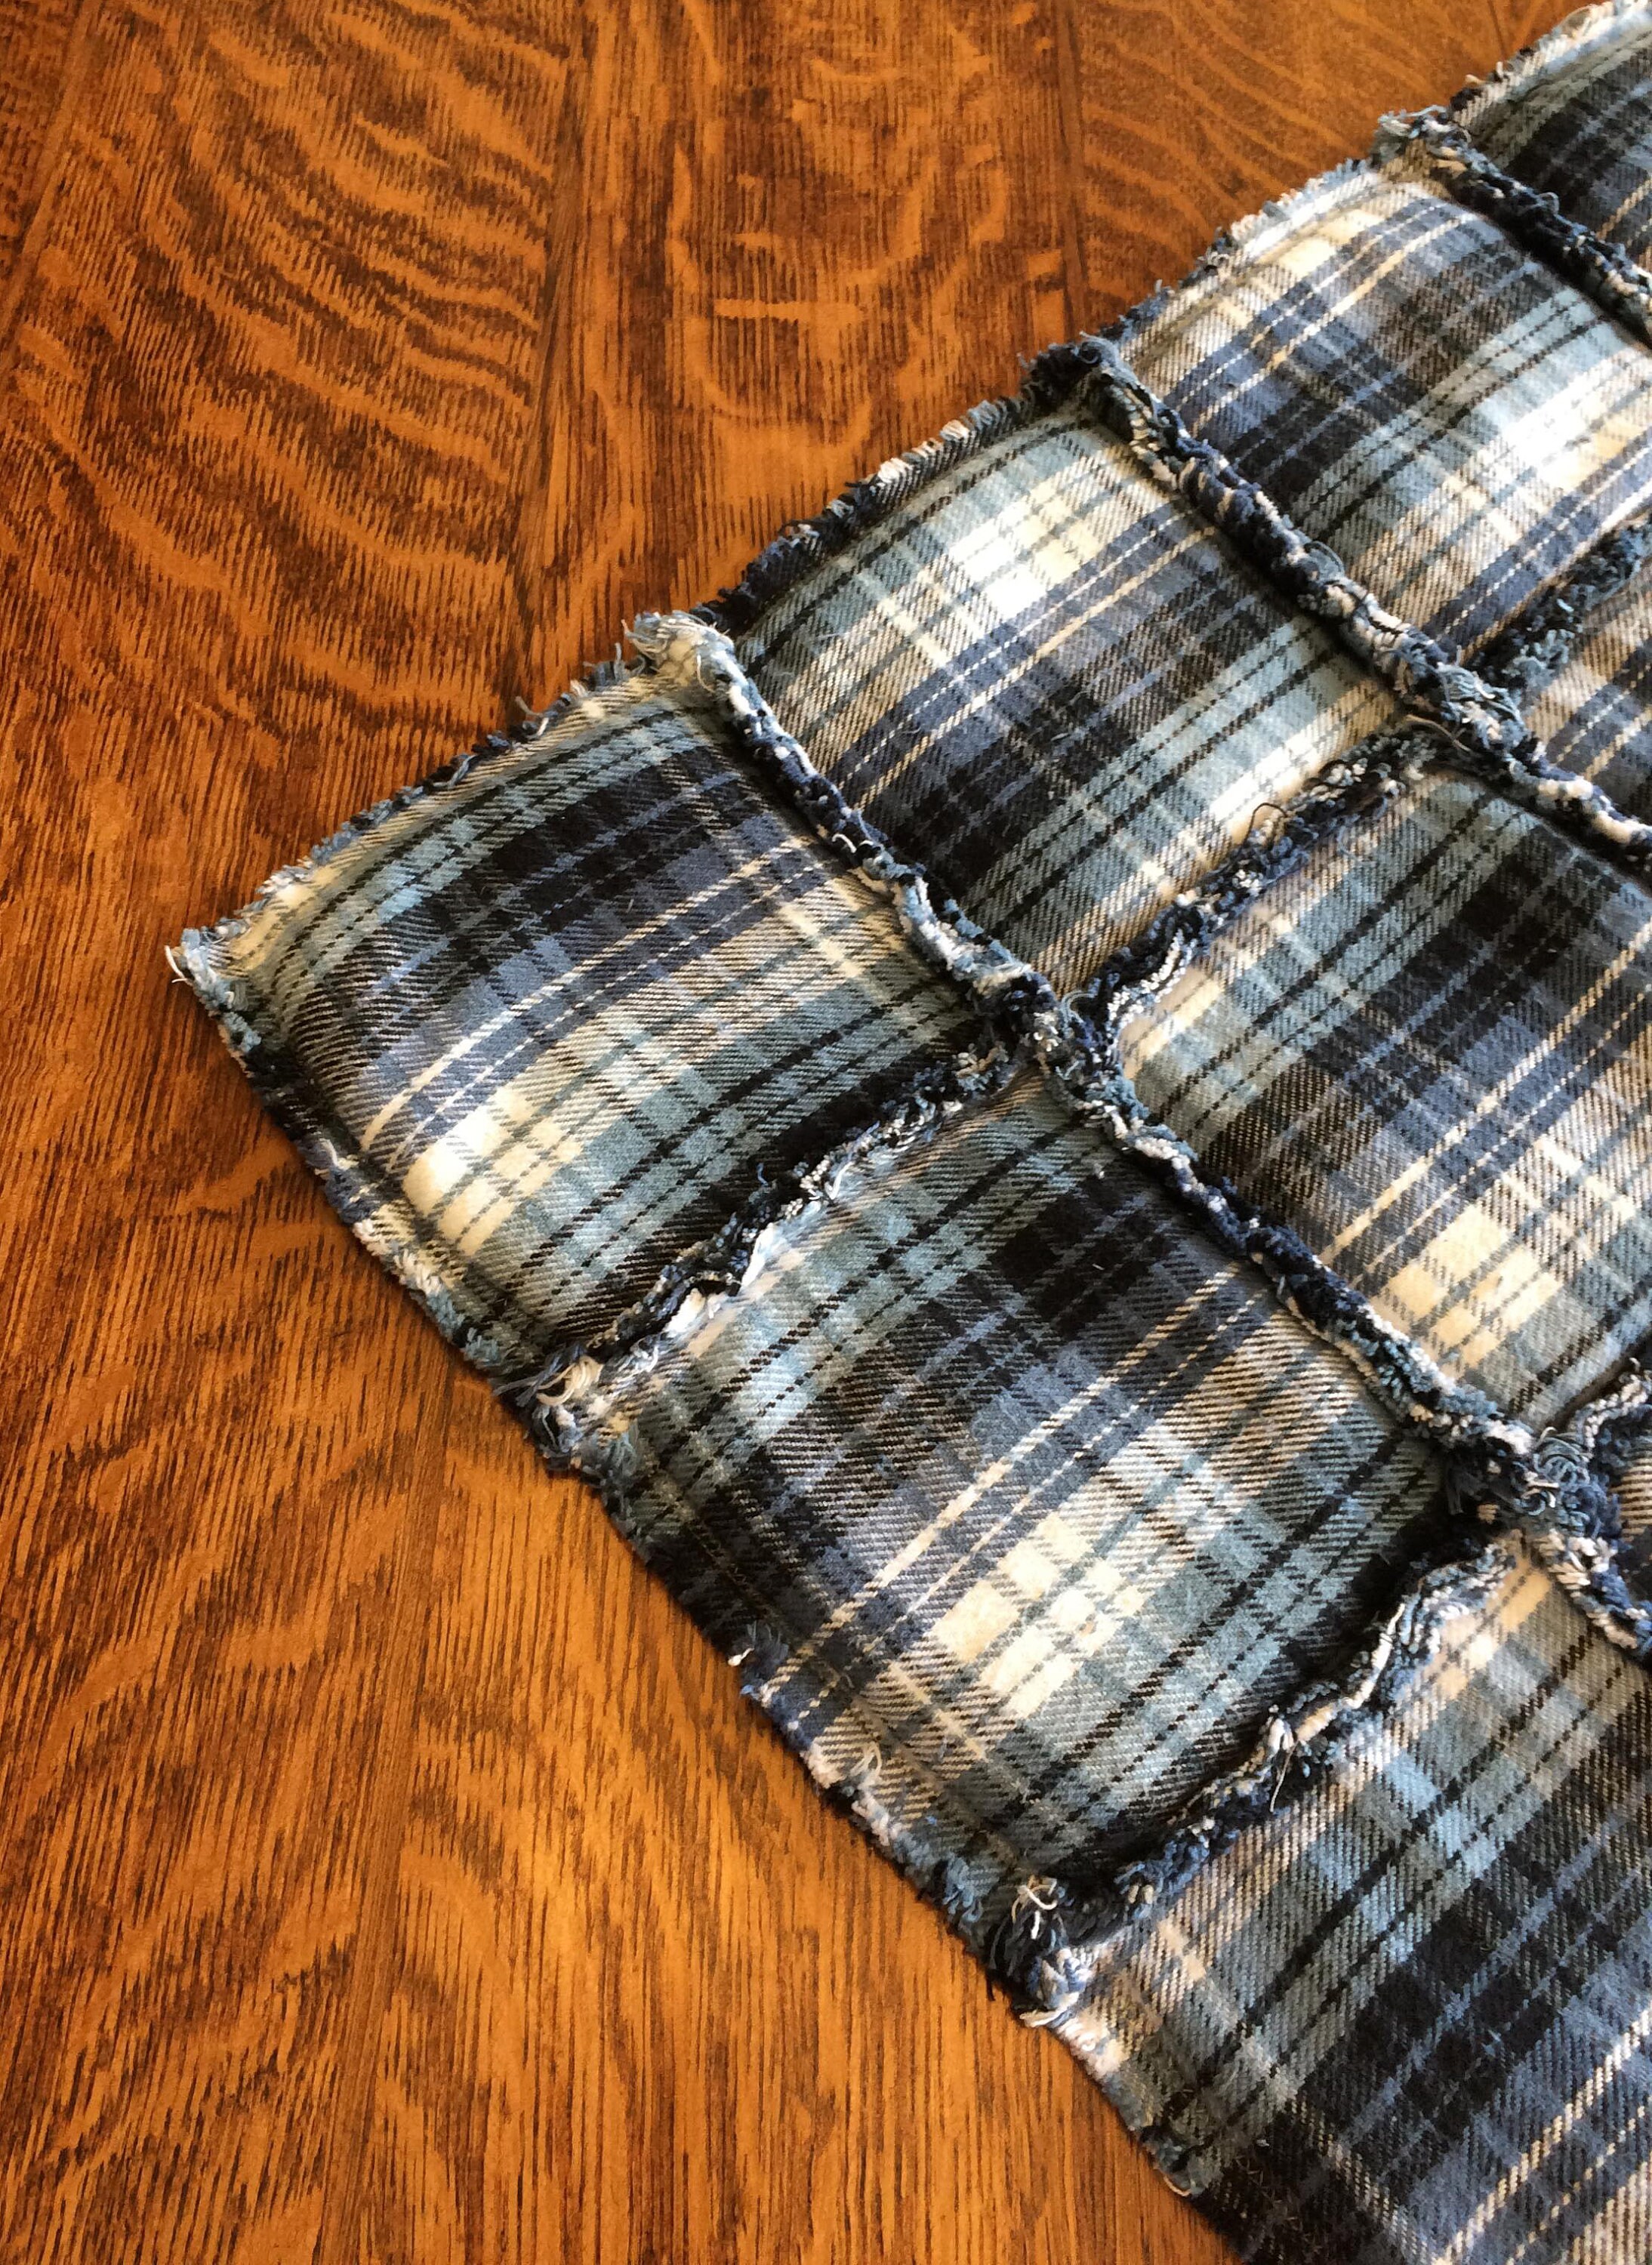 Weighted Lap Pad, Blue Plaid Flannel Weighted Lap Blanket, Adult, Child